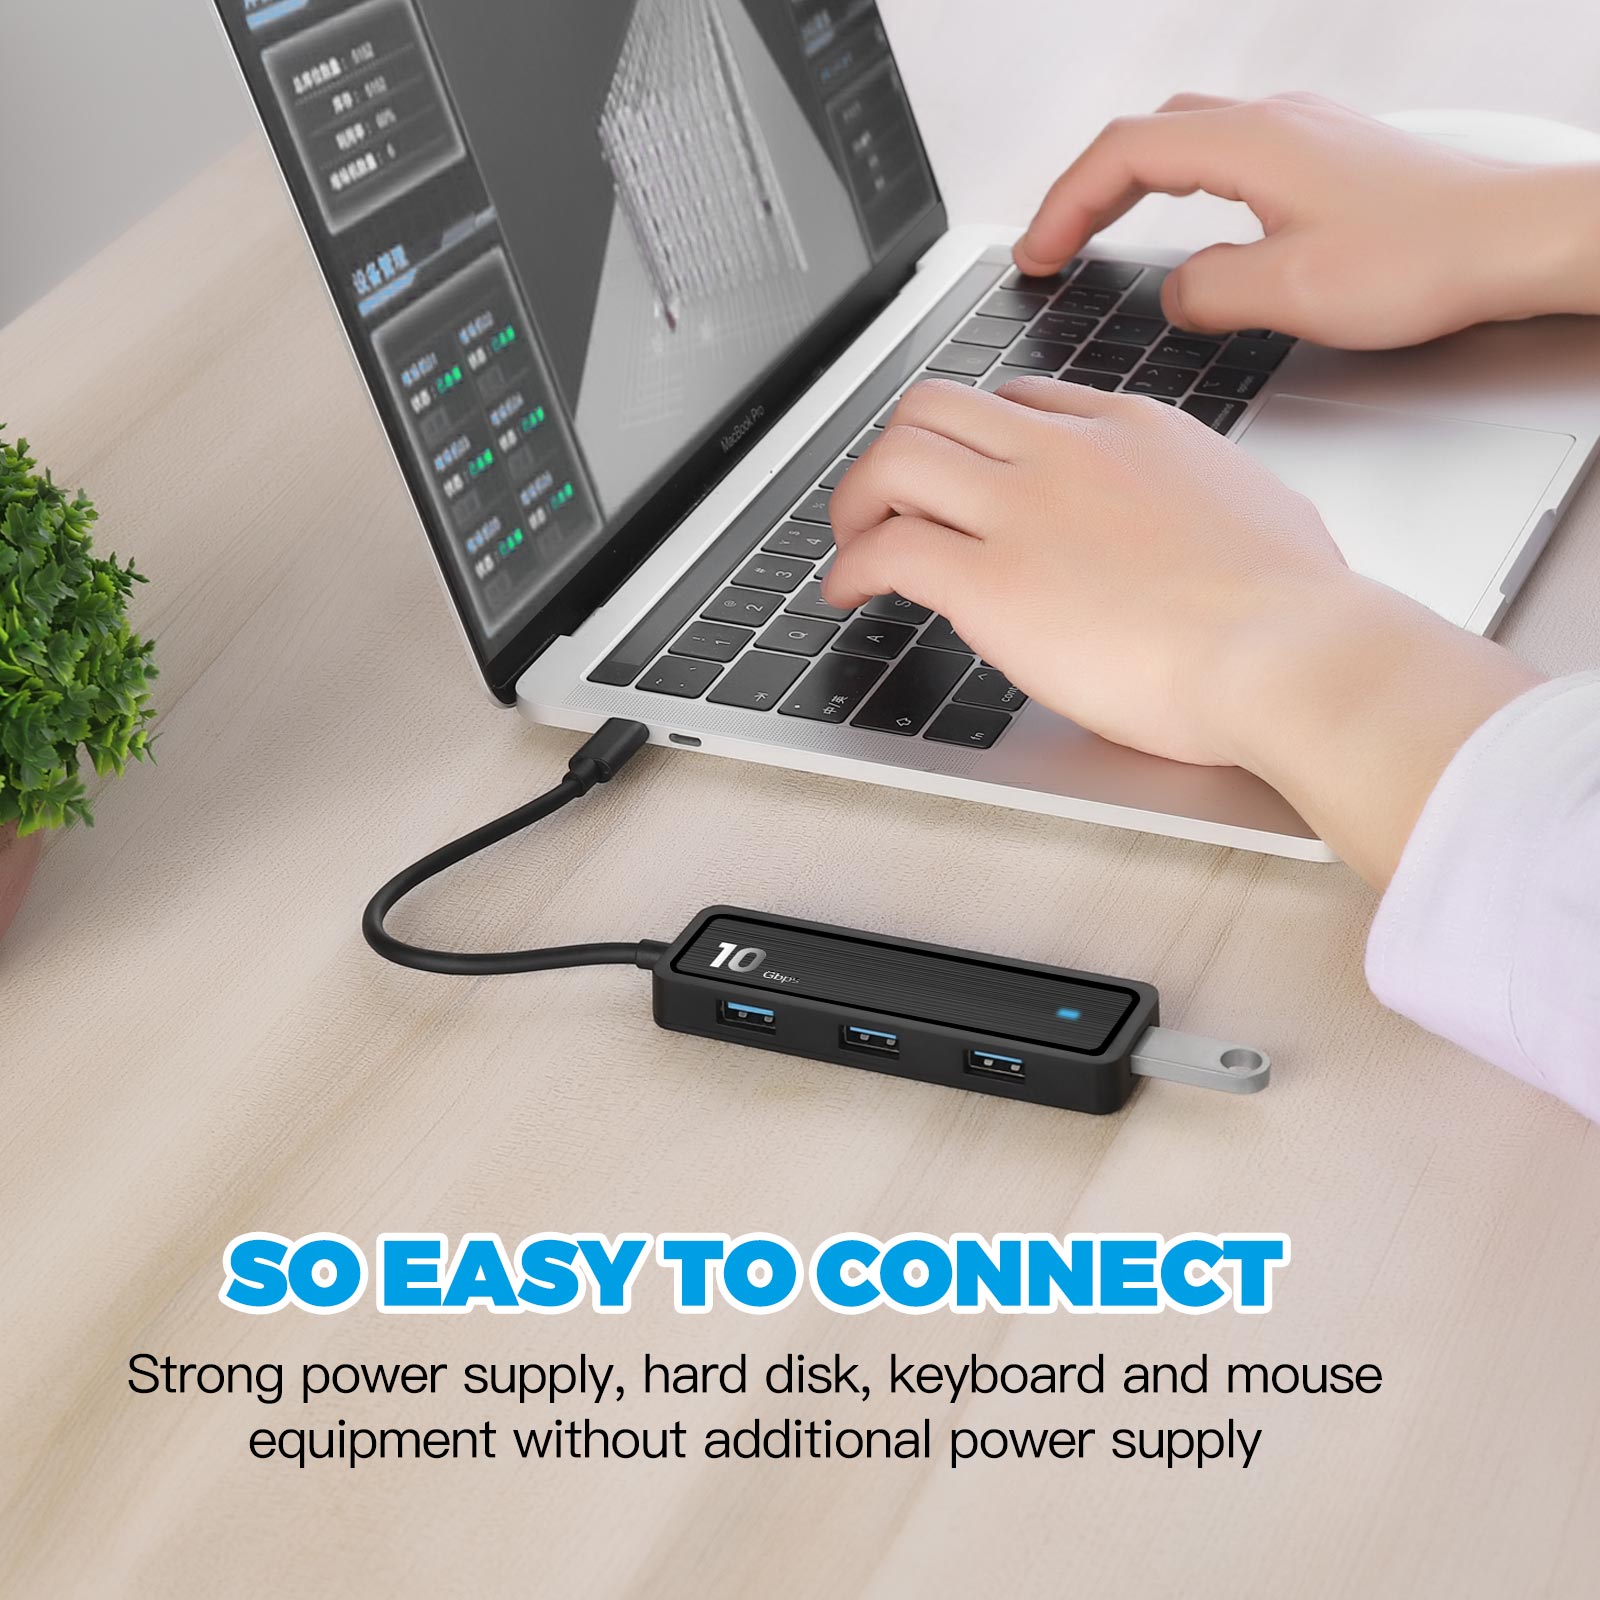 Pinrui-6-in-1-USB-Hub-4-Port-USB31-Gen-2-Expander-with-SD-TF-Adapter-Laptop-Docking-Station-1951382-3